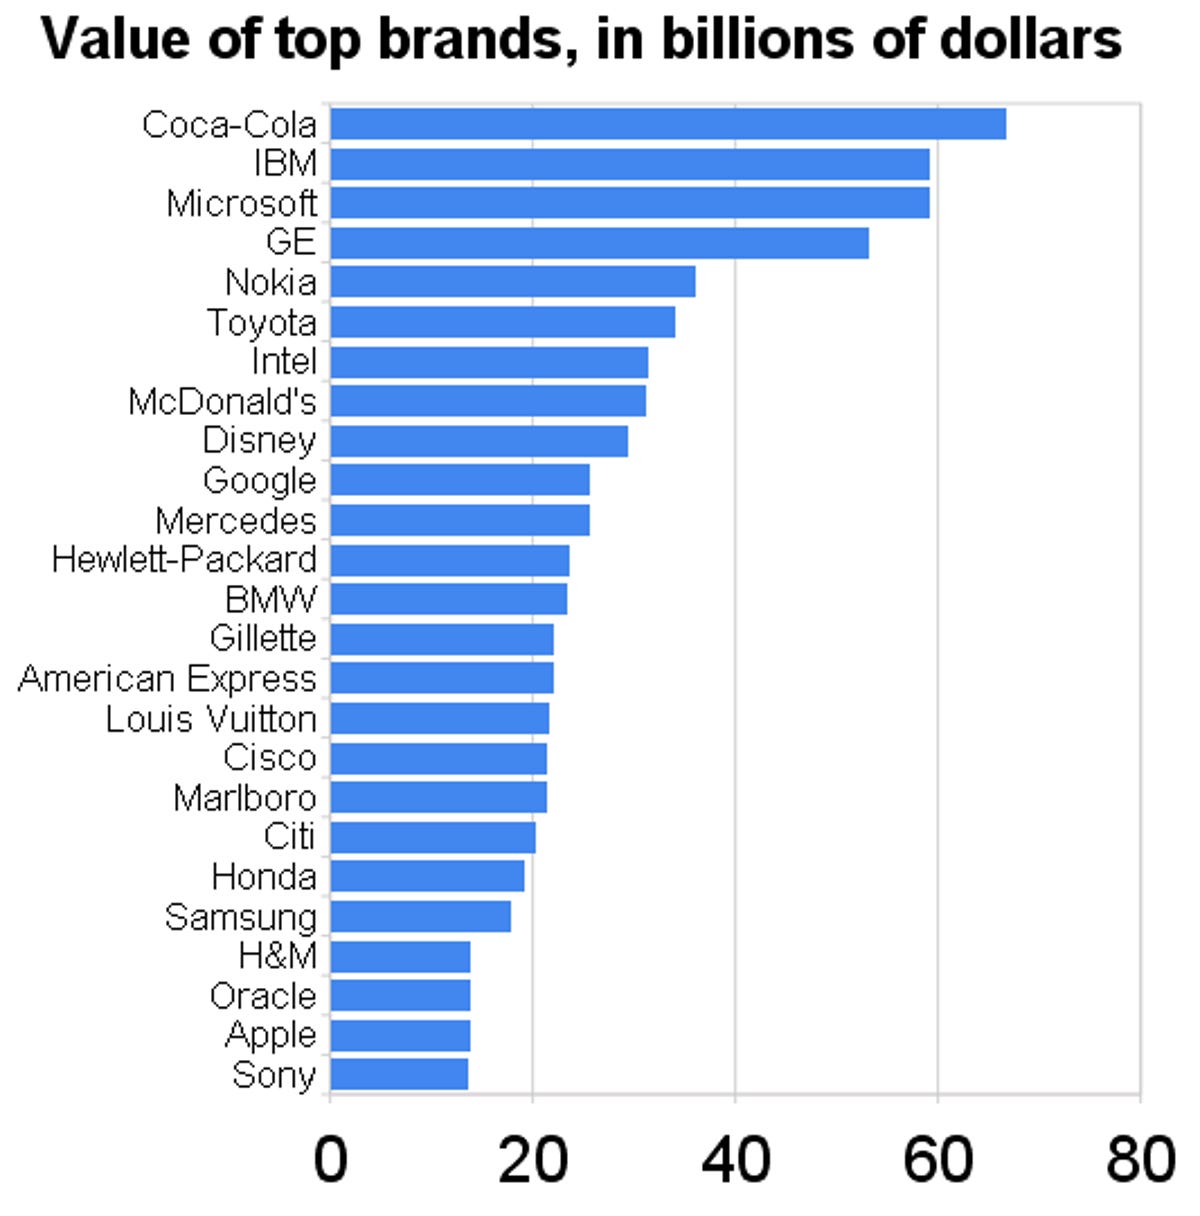 Coca-Cola is king, but technology companies are common in the top 25 brands.